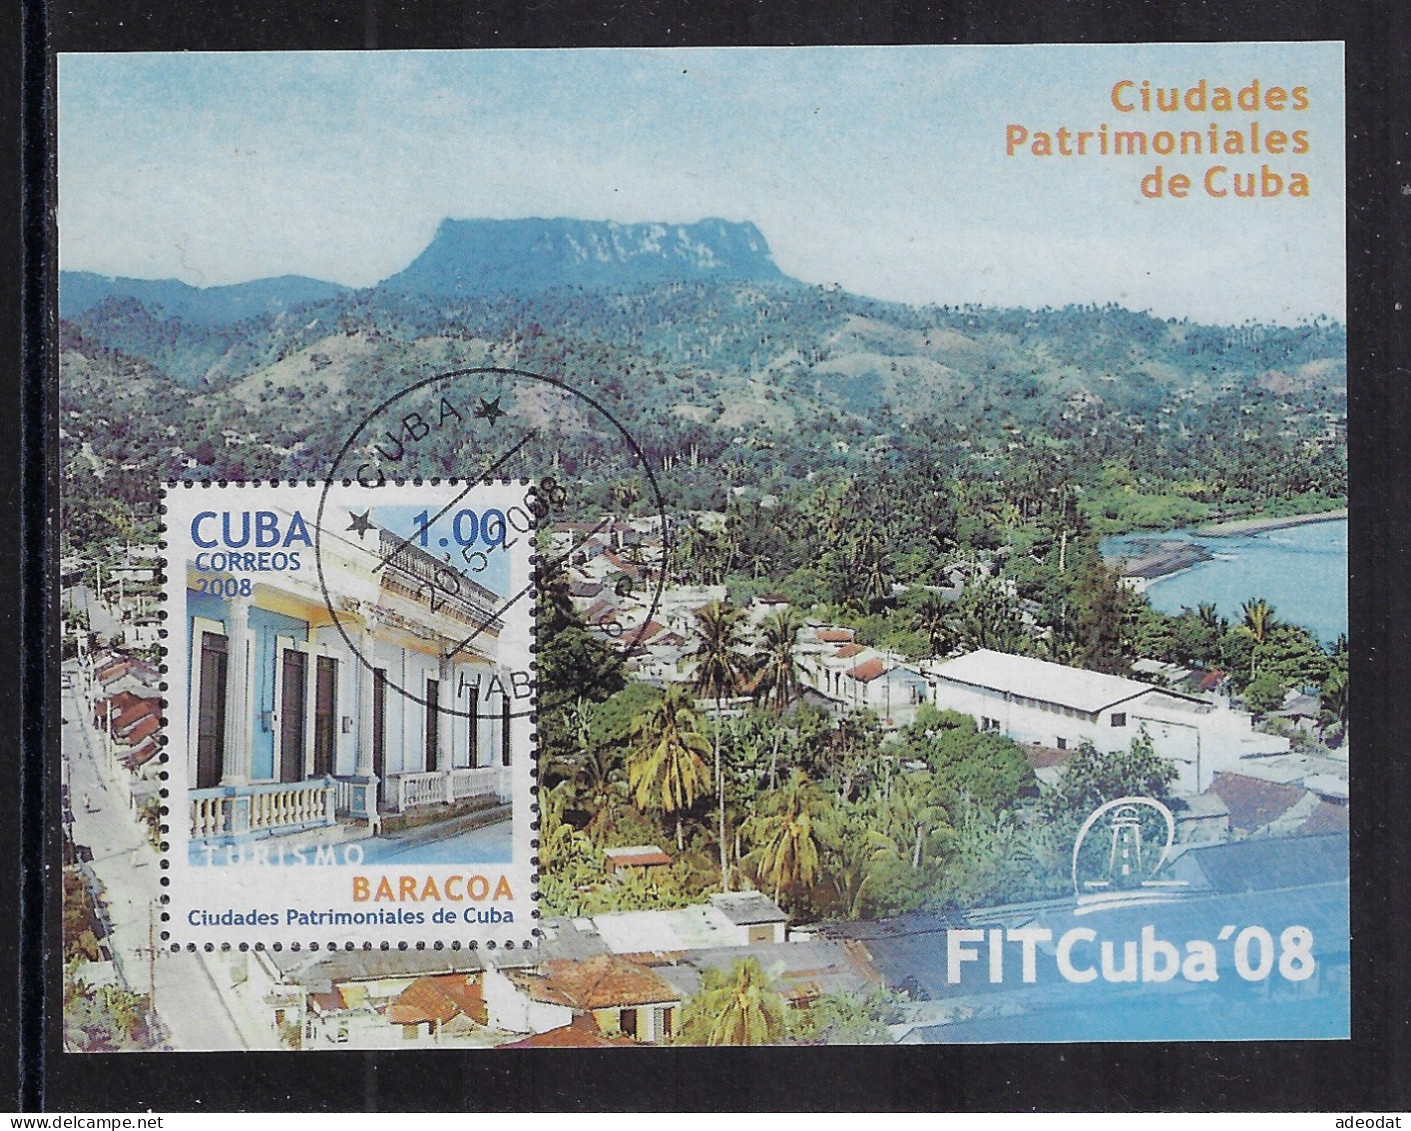 CUBA 2008 MINI SHEET TOURISM  STAMPWORLD 5092 CANCELLED - Used Stamps